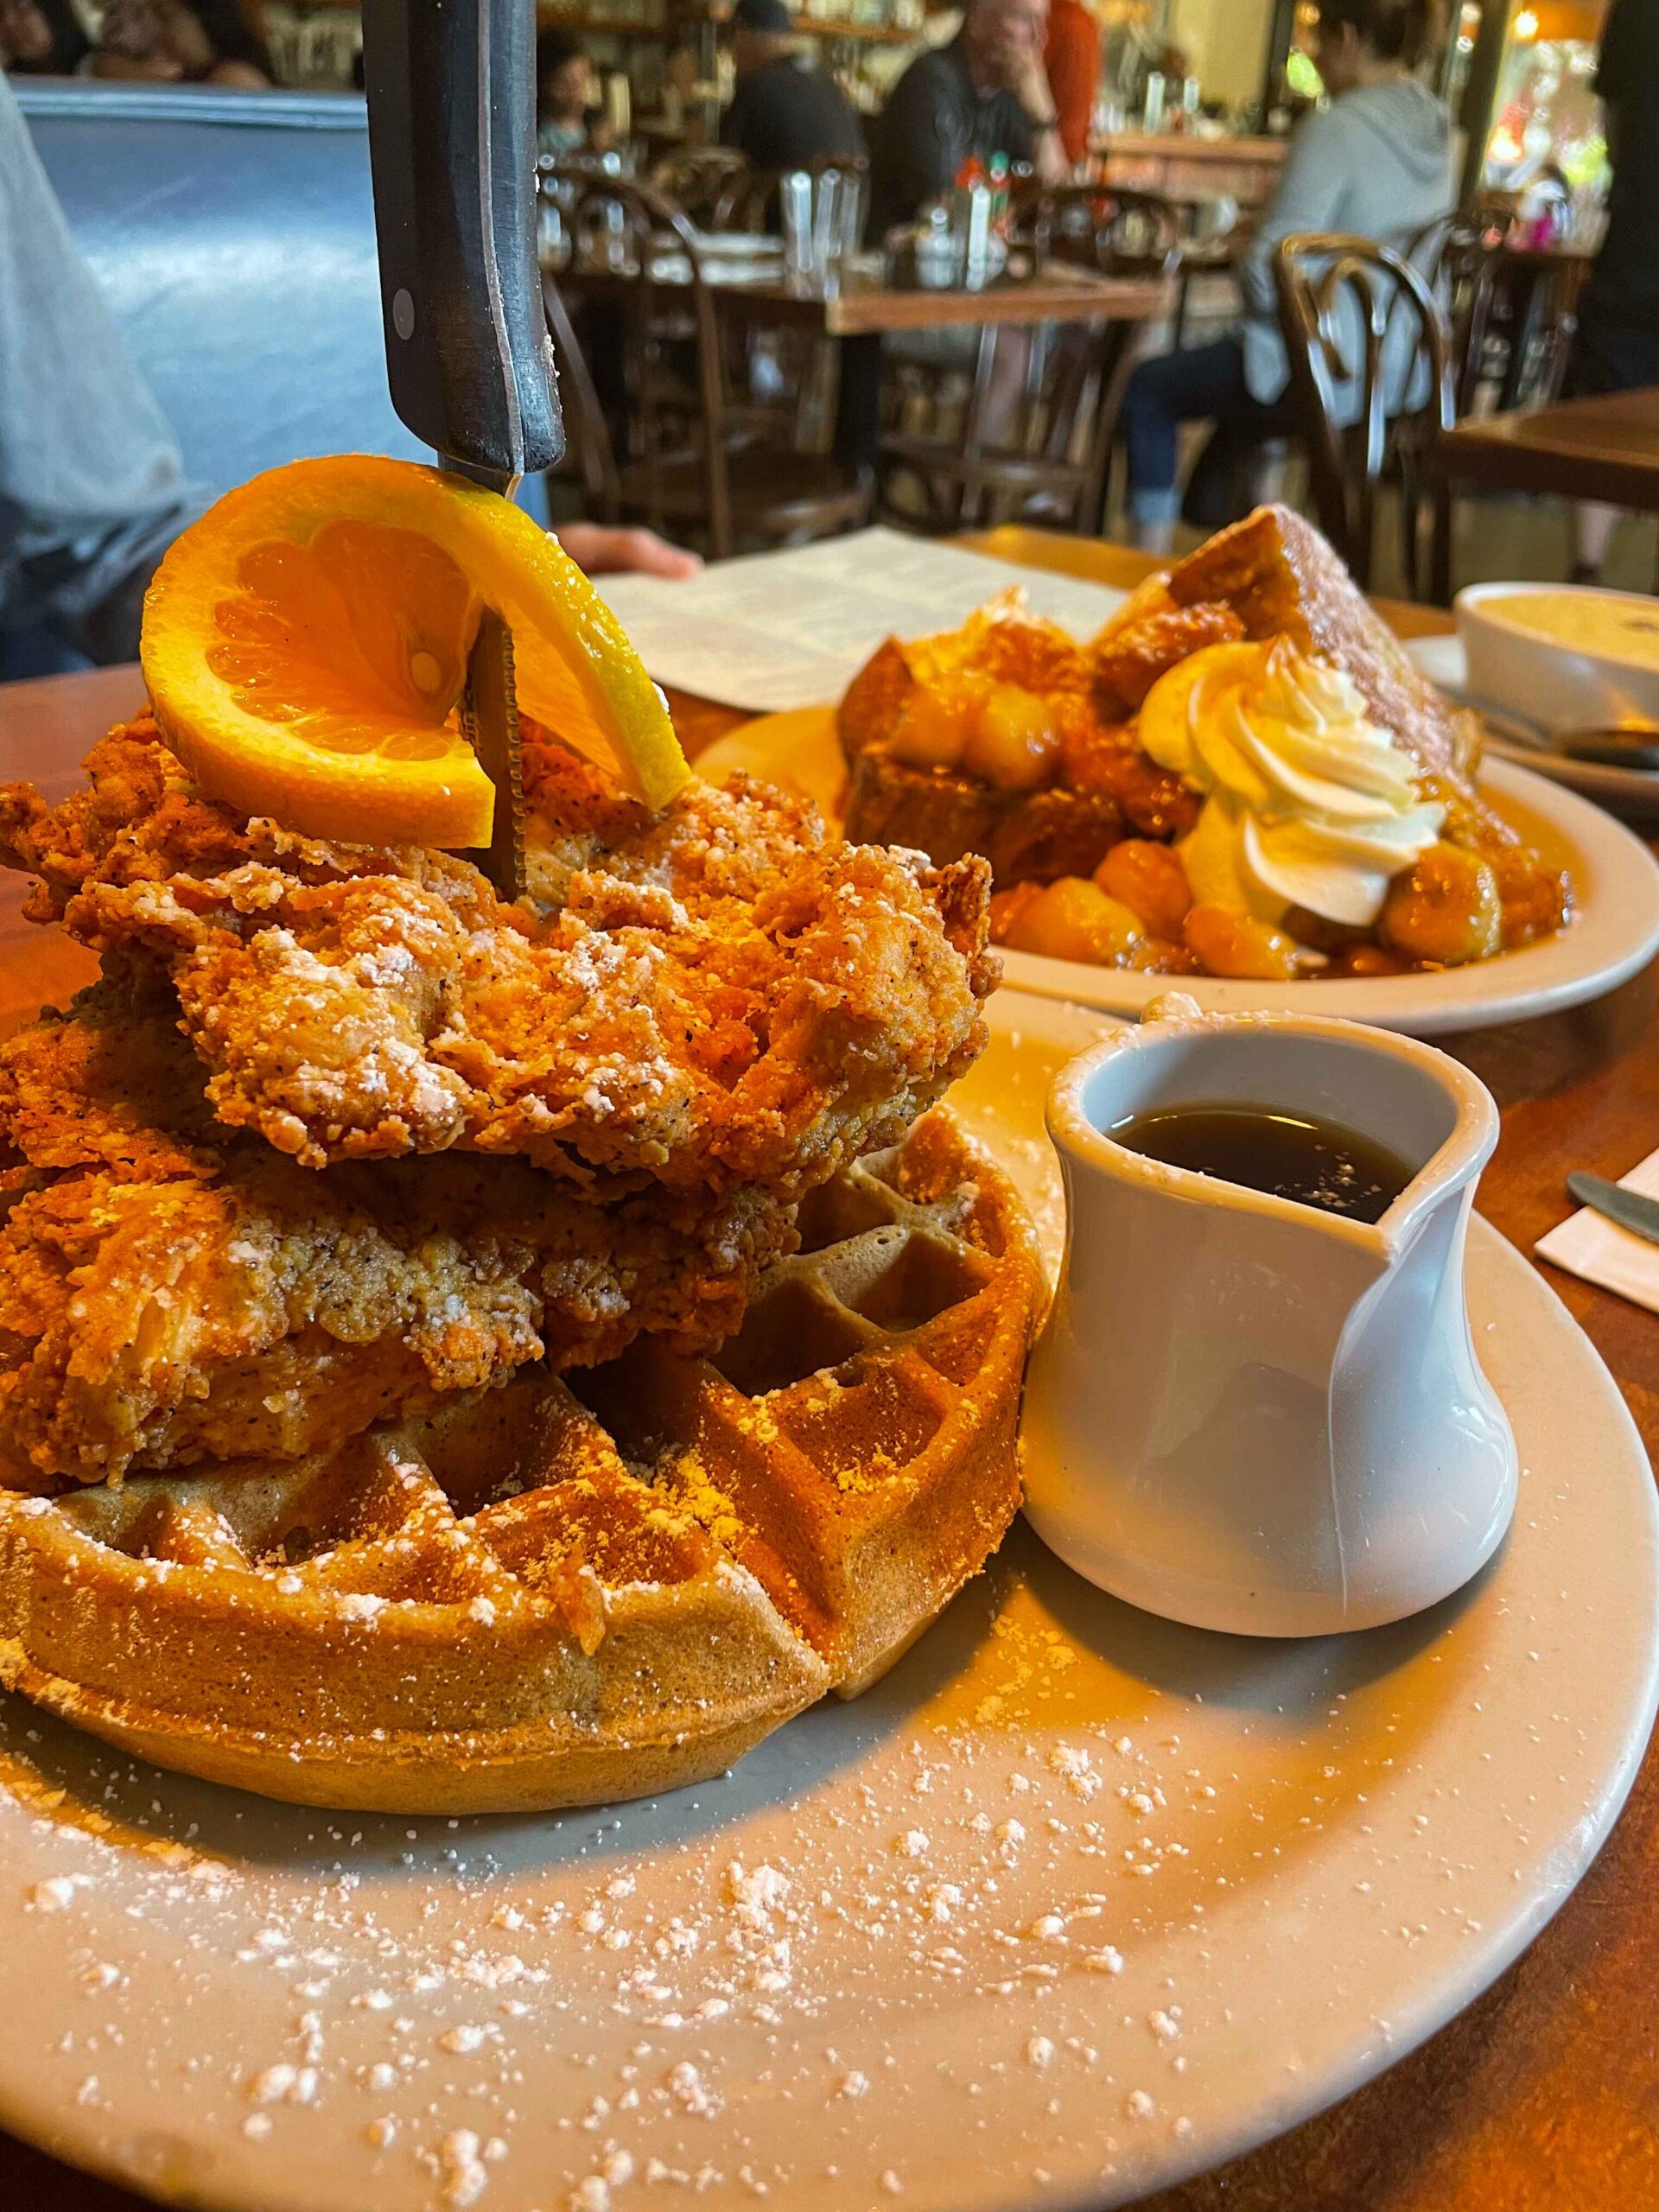 Chicken and Waffle and French Toast from Screen Door in Portland, Oregon